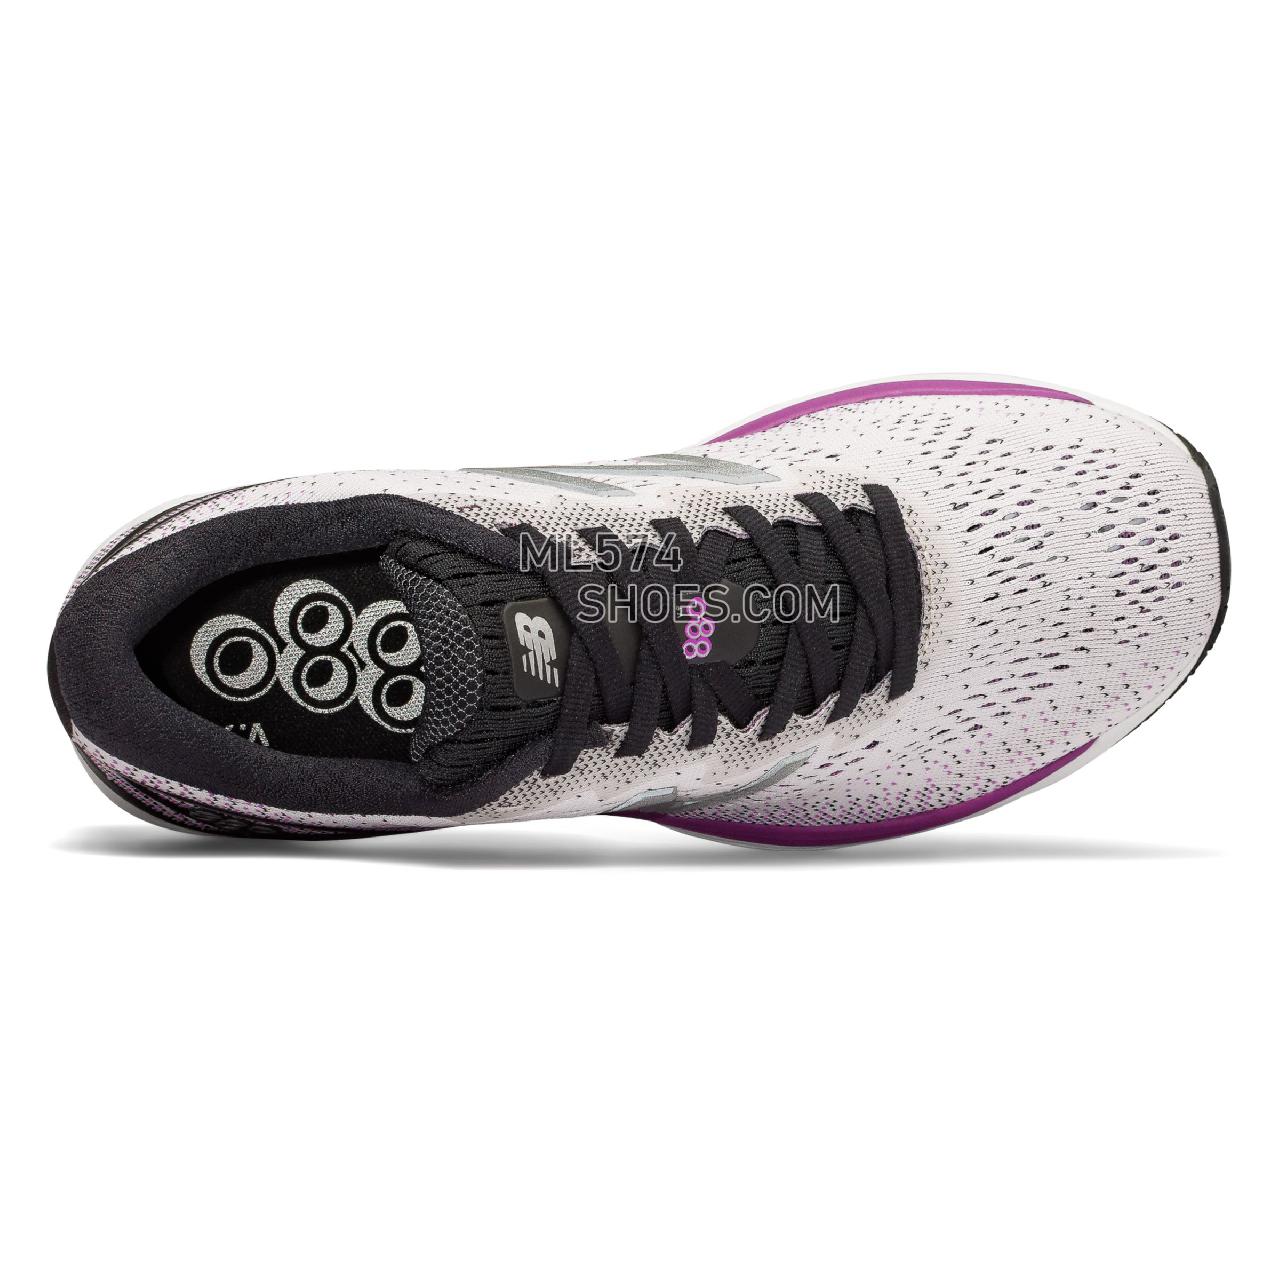 New Balance 880v9 - Women's Neutral Running - White with Voltage Violet and Black - W880WT9